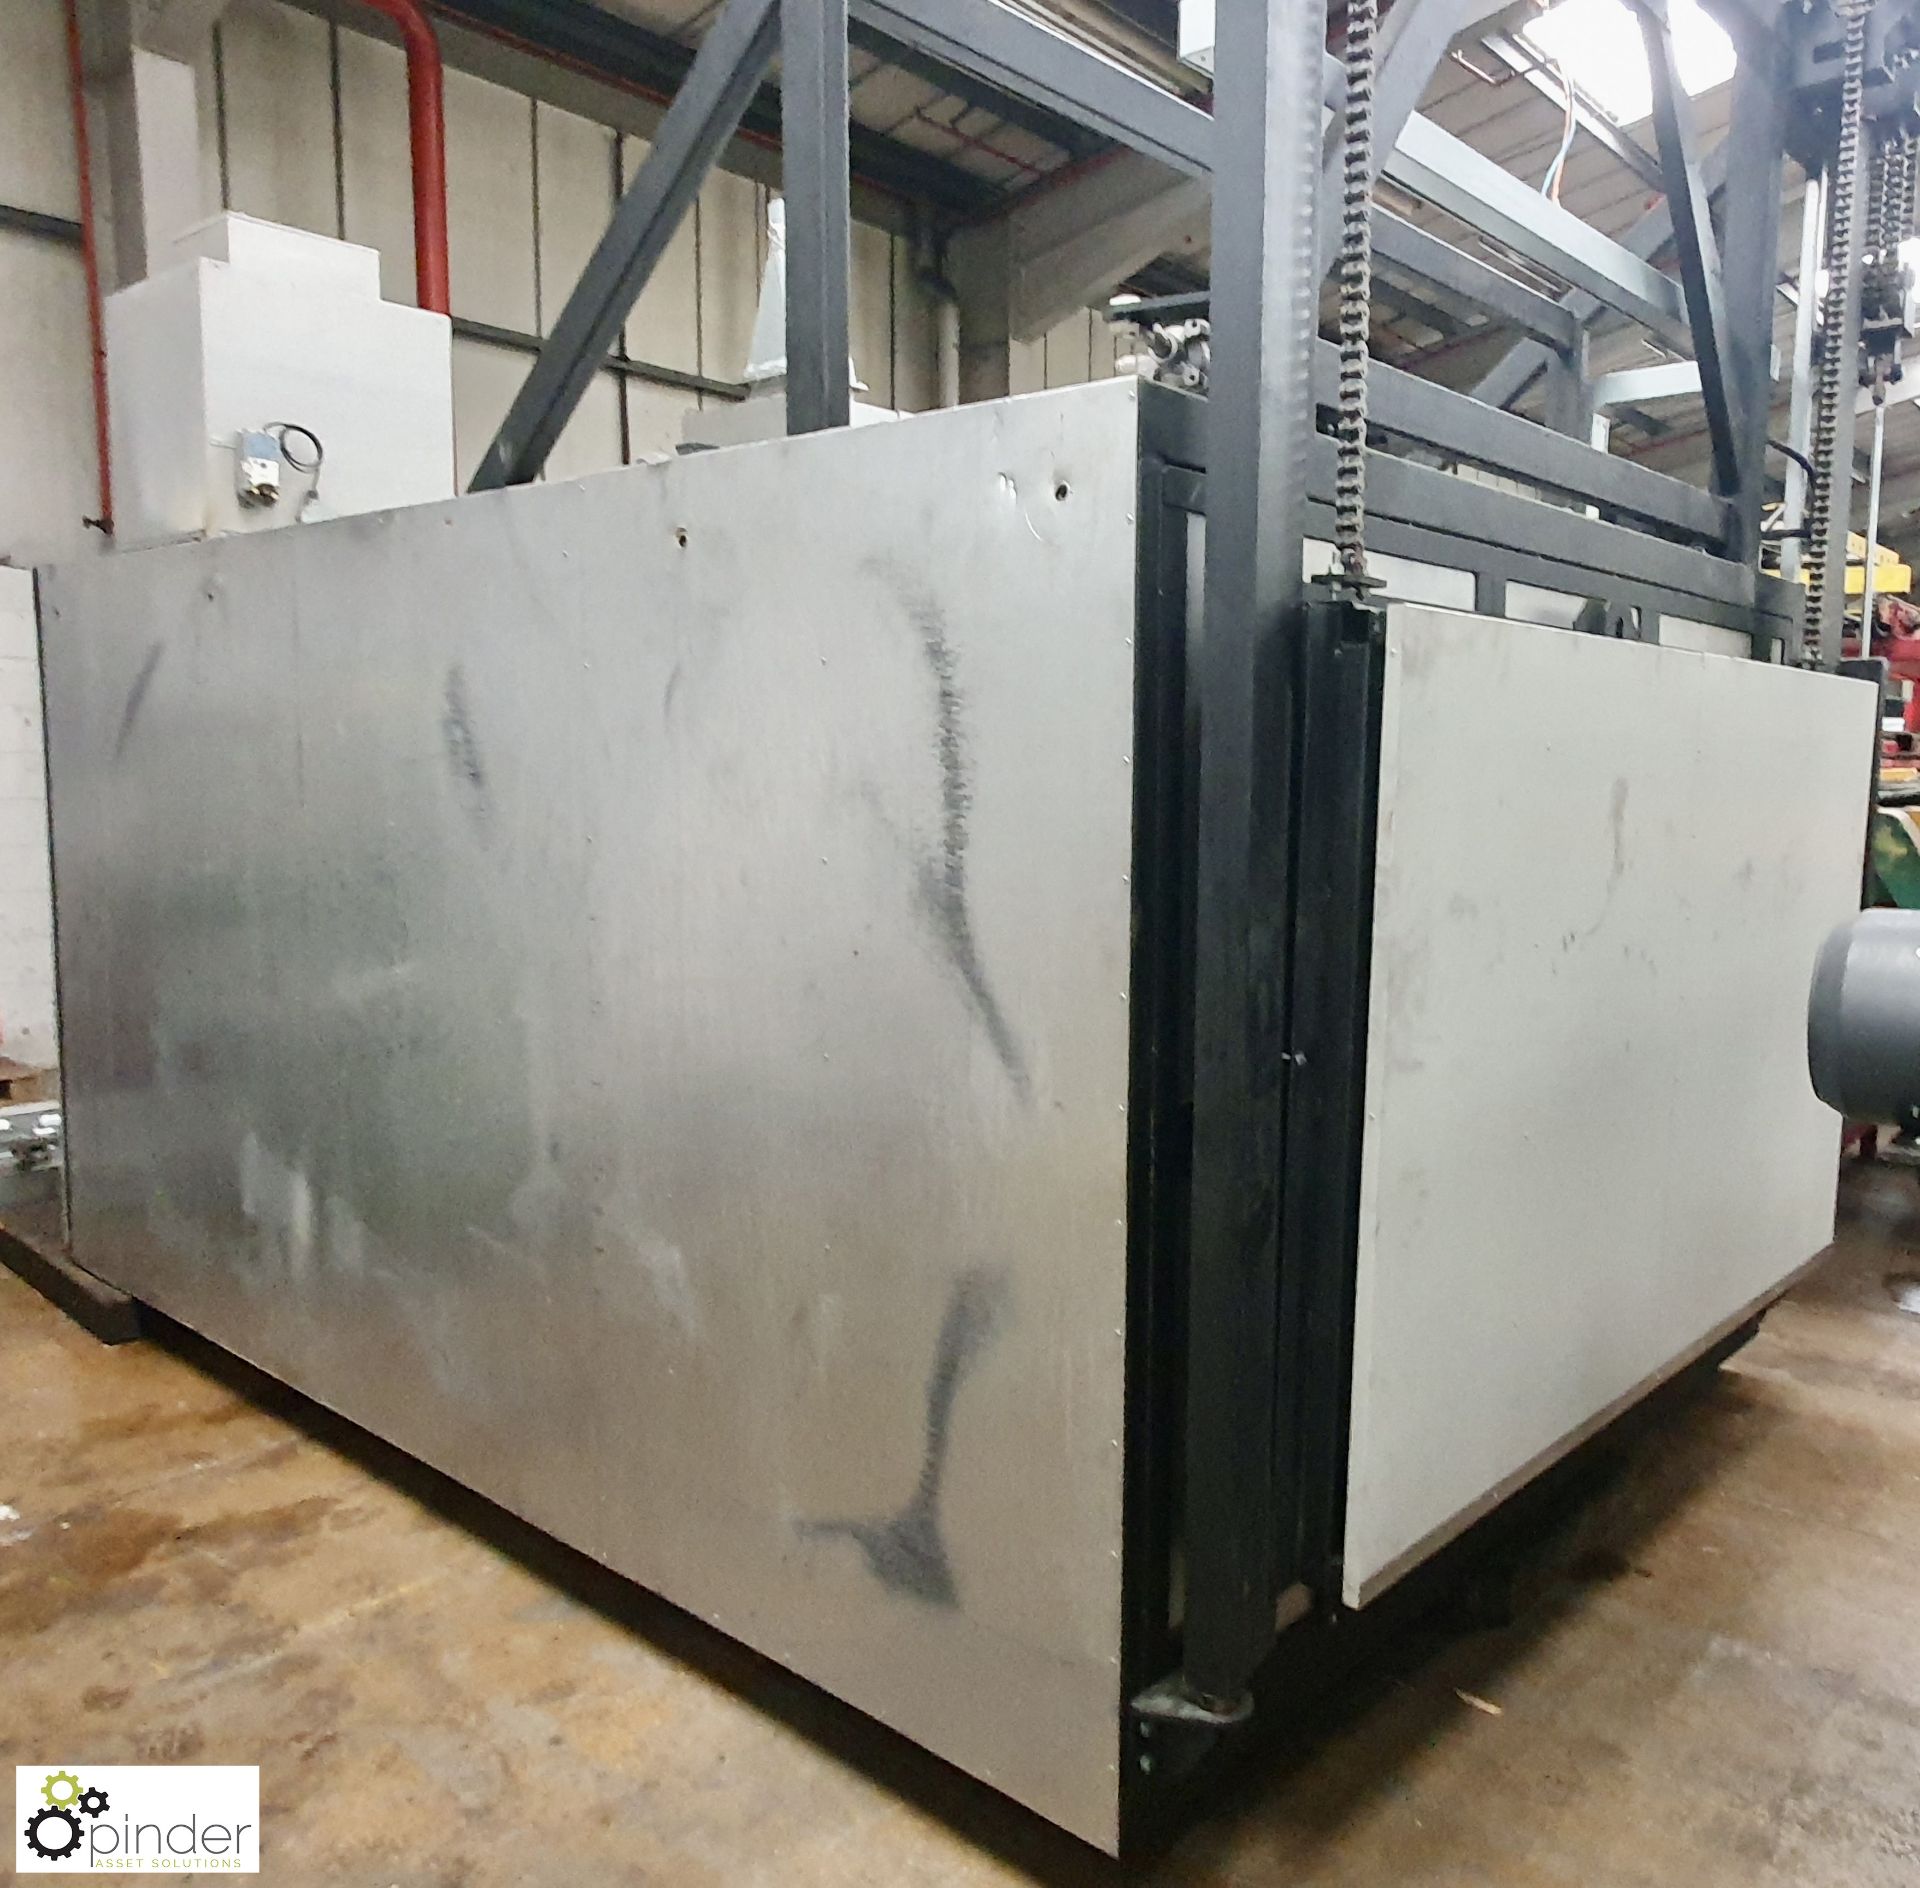 Caltherm Paint Oven freestanding medium sized gas fired Box Oven, year 2017, serial number - Image 2 of 15